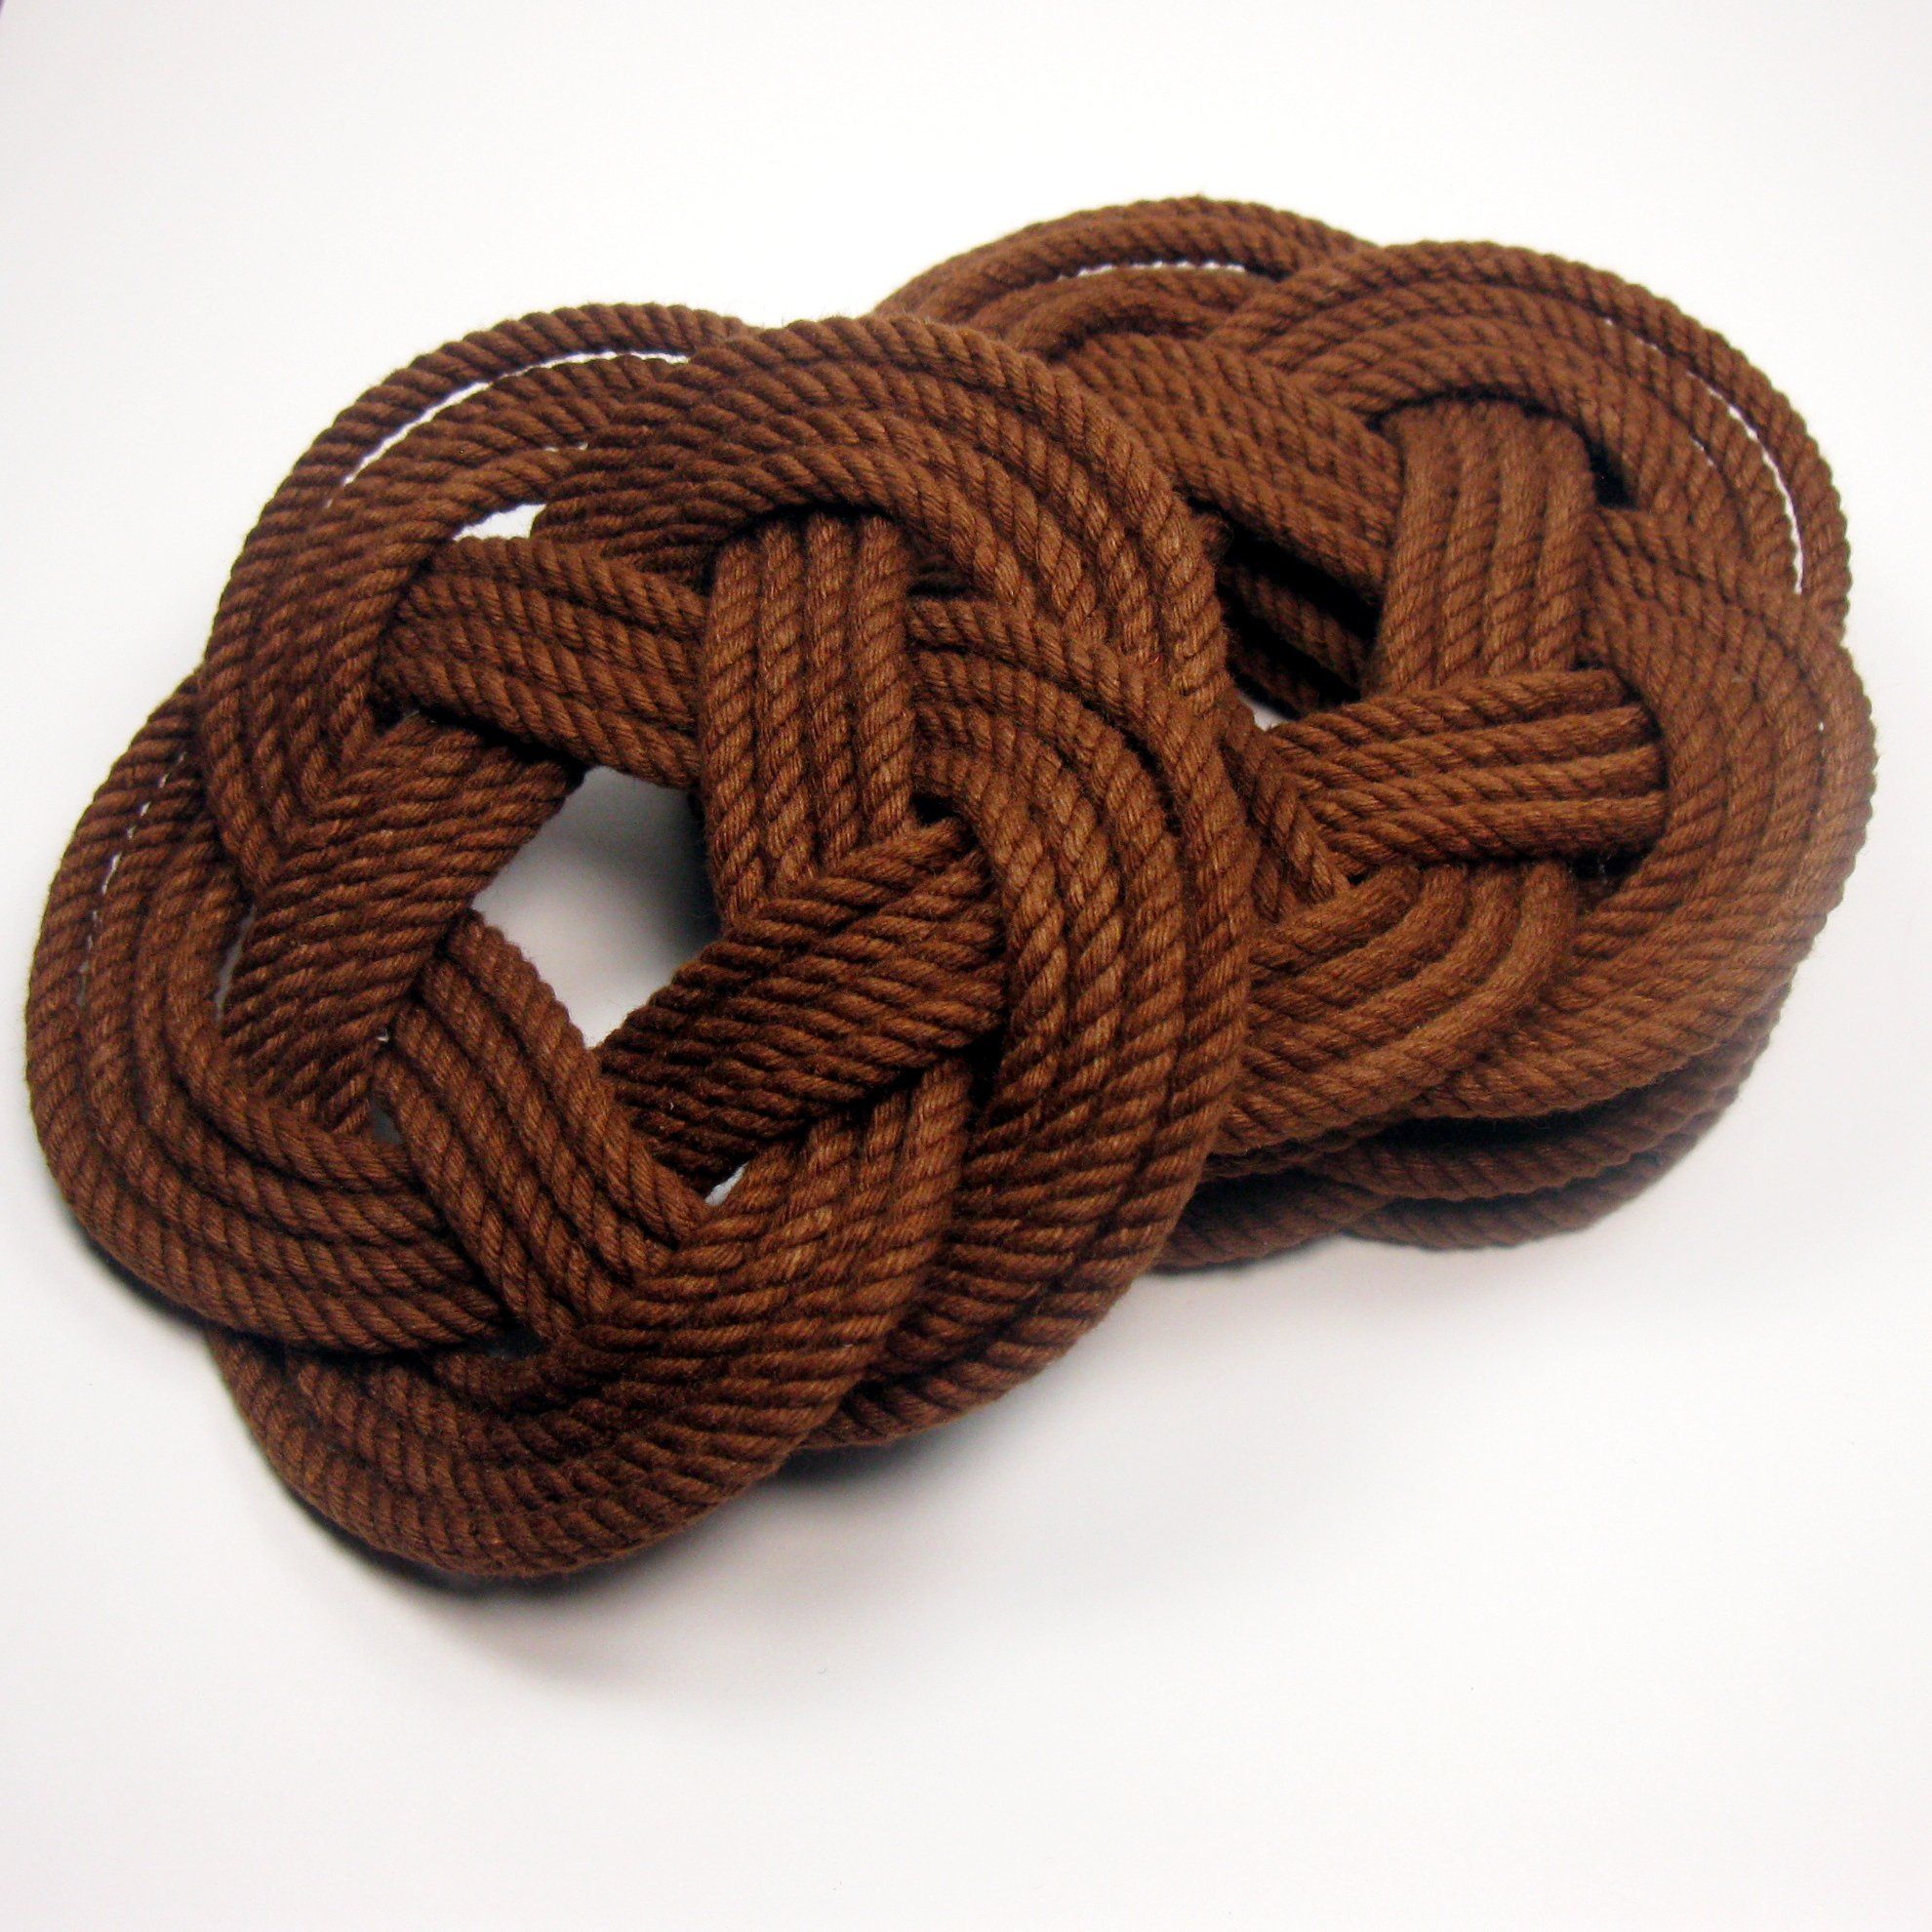 Nautical Knot Sailor Knot Coasters, woven in Brown Cotton , Set of 4 handmade at Mystic Knotwork